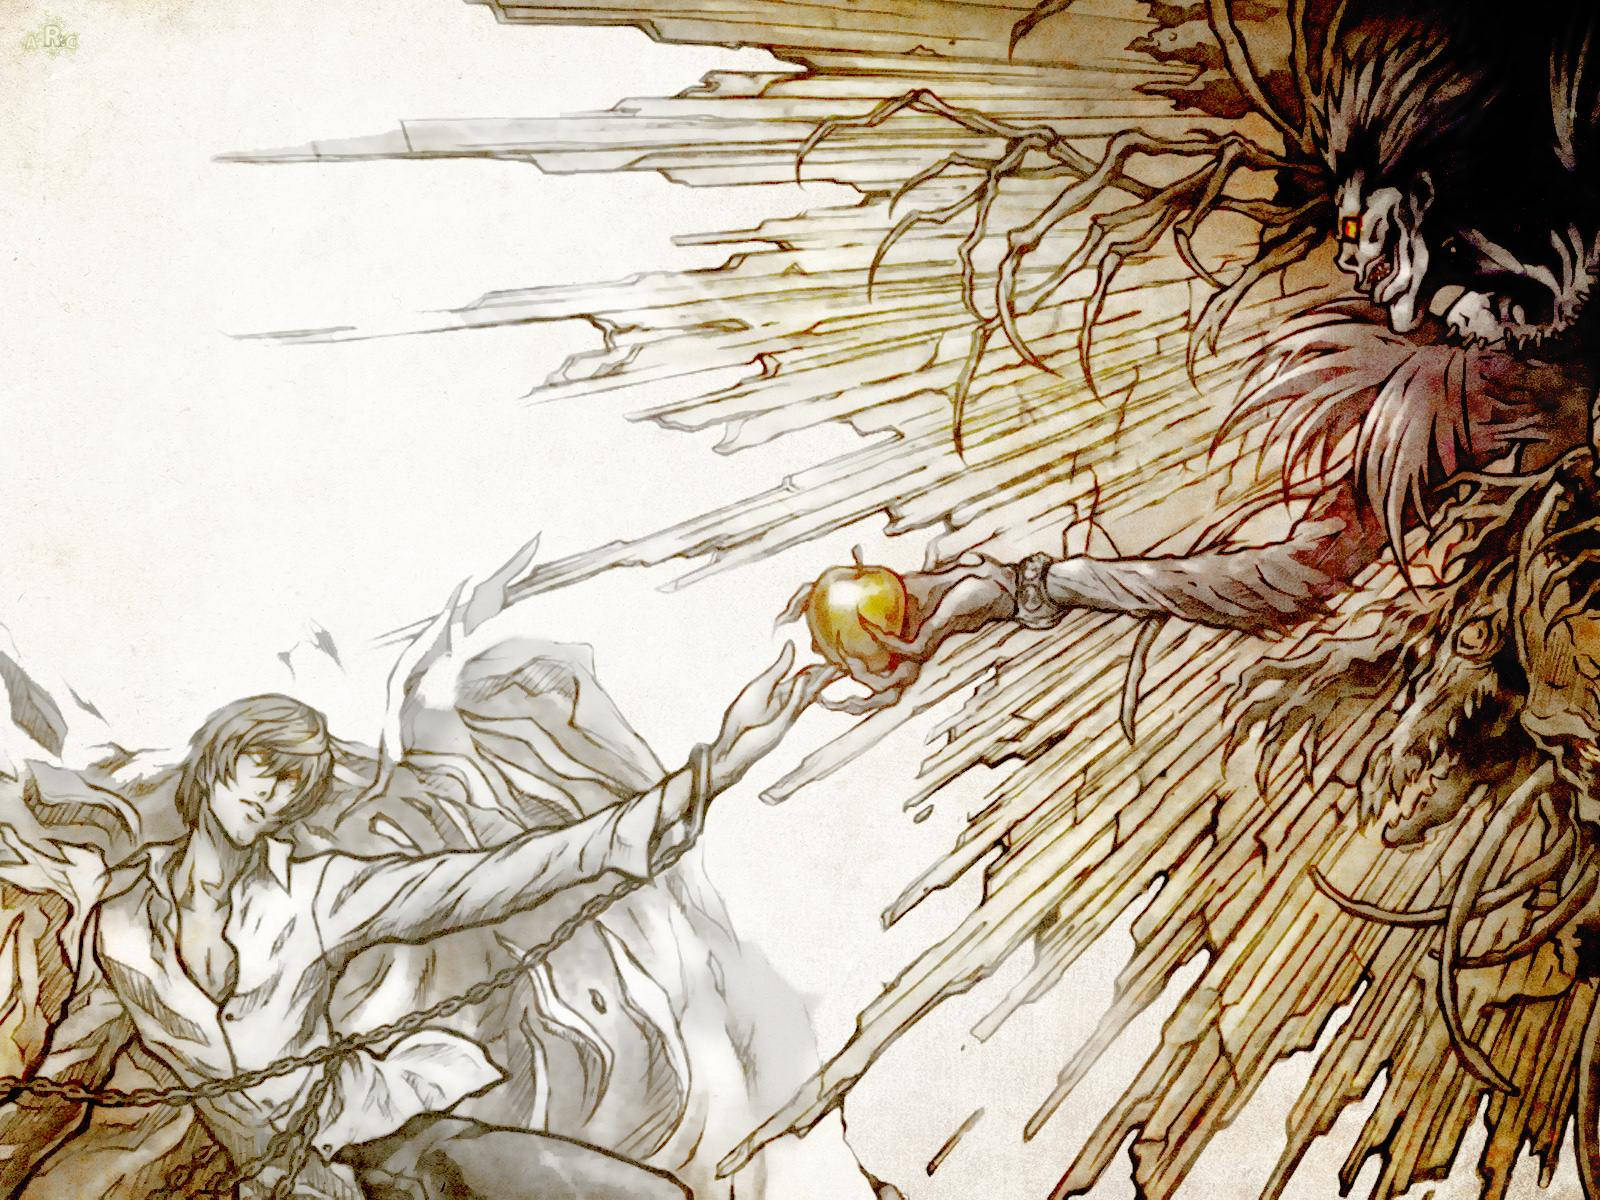 Download A Light and Ryuk from Death Note Wallpaper